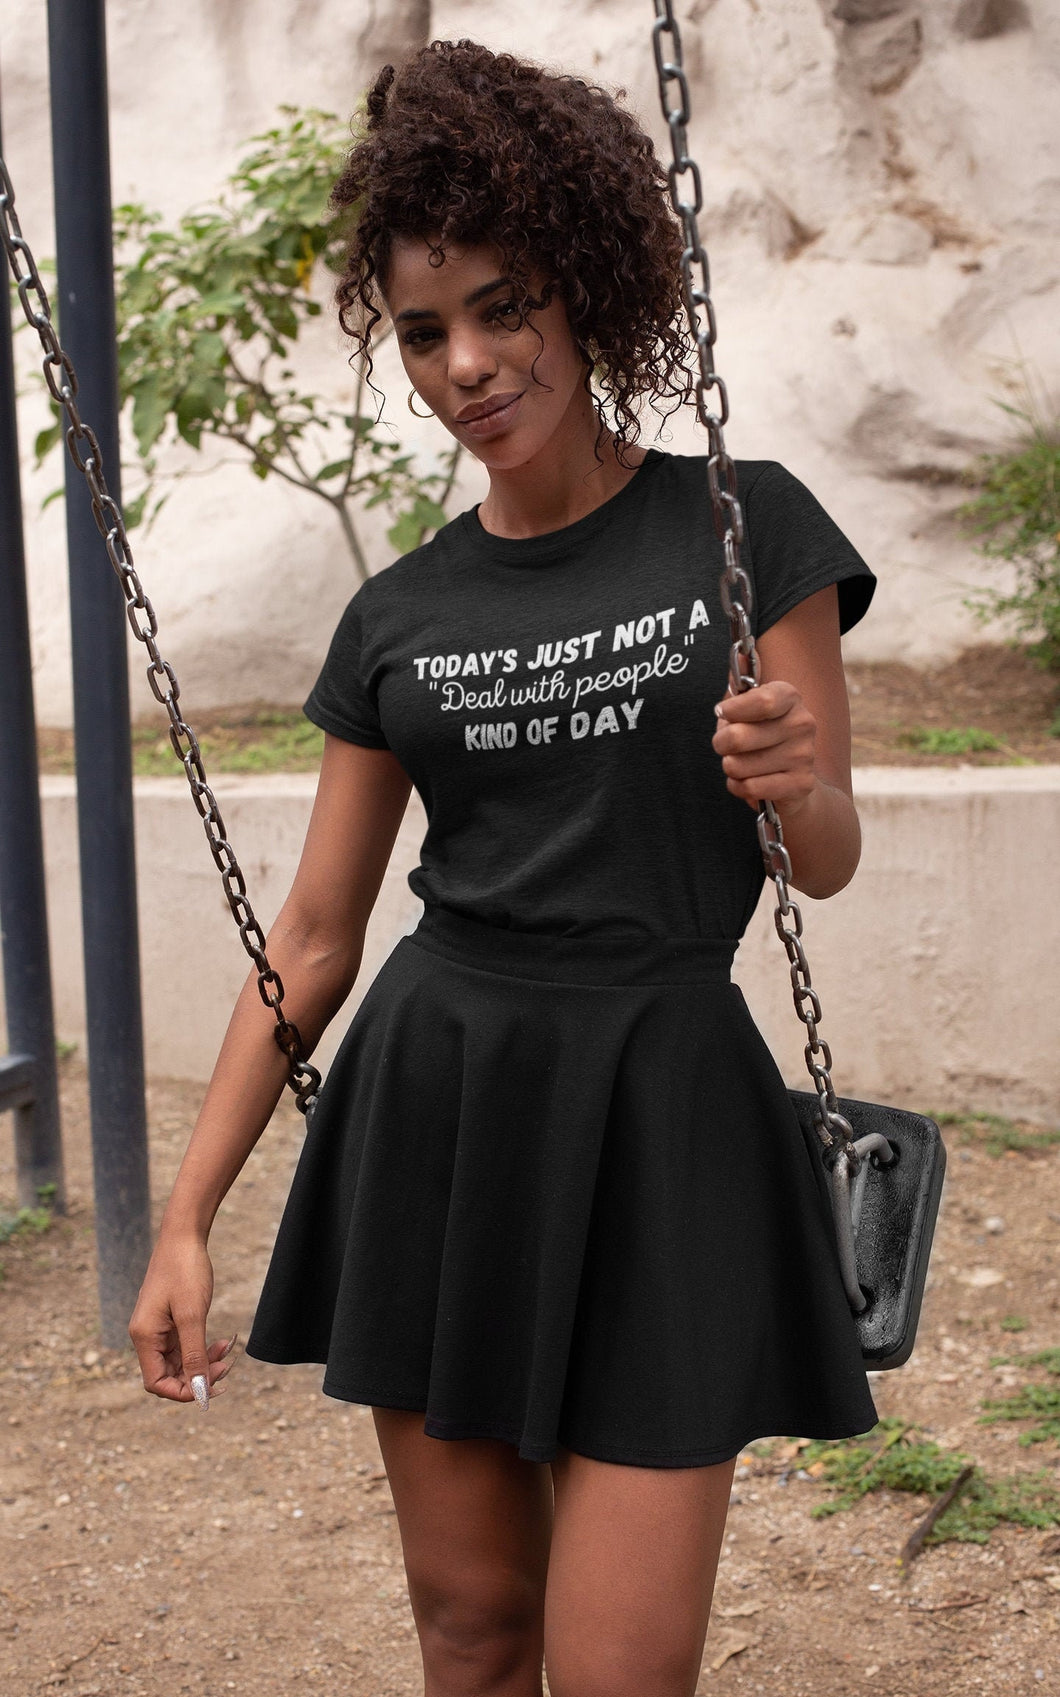 Today's Just Not a Deal With People Kind Of Day - Unisex T-shirt